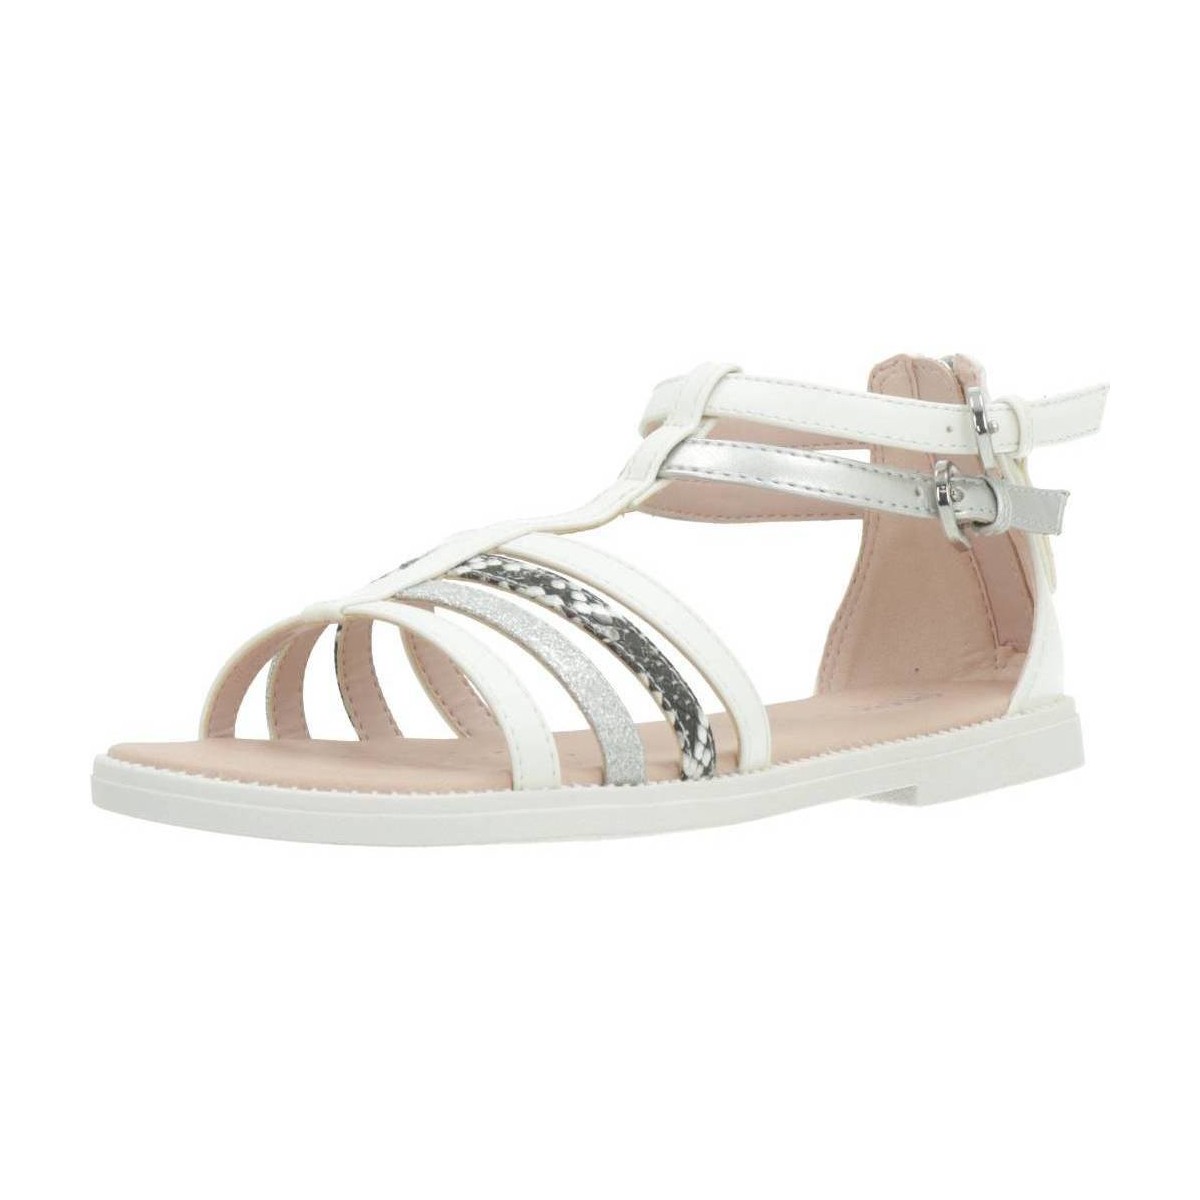 Chaussures Fille Sandales et Nu-pieds Geox J SANDAL KARLY GIRL Blanc